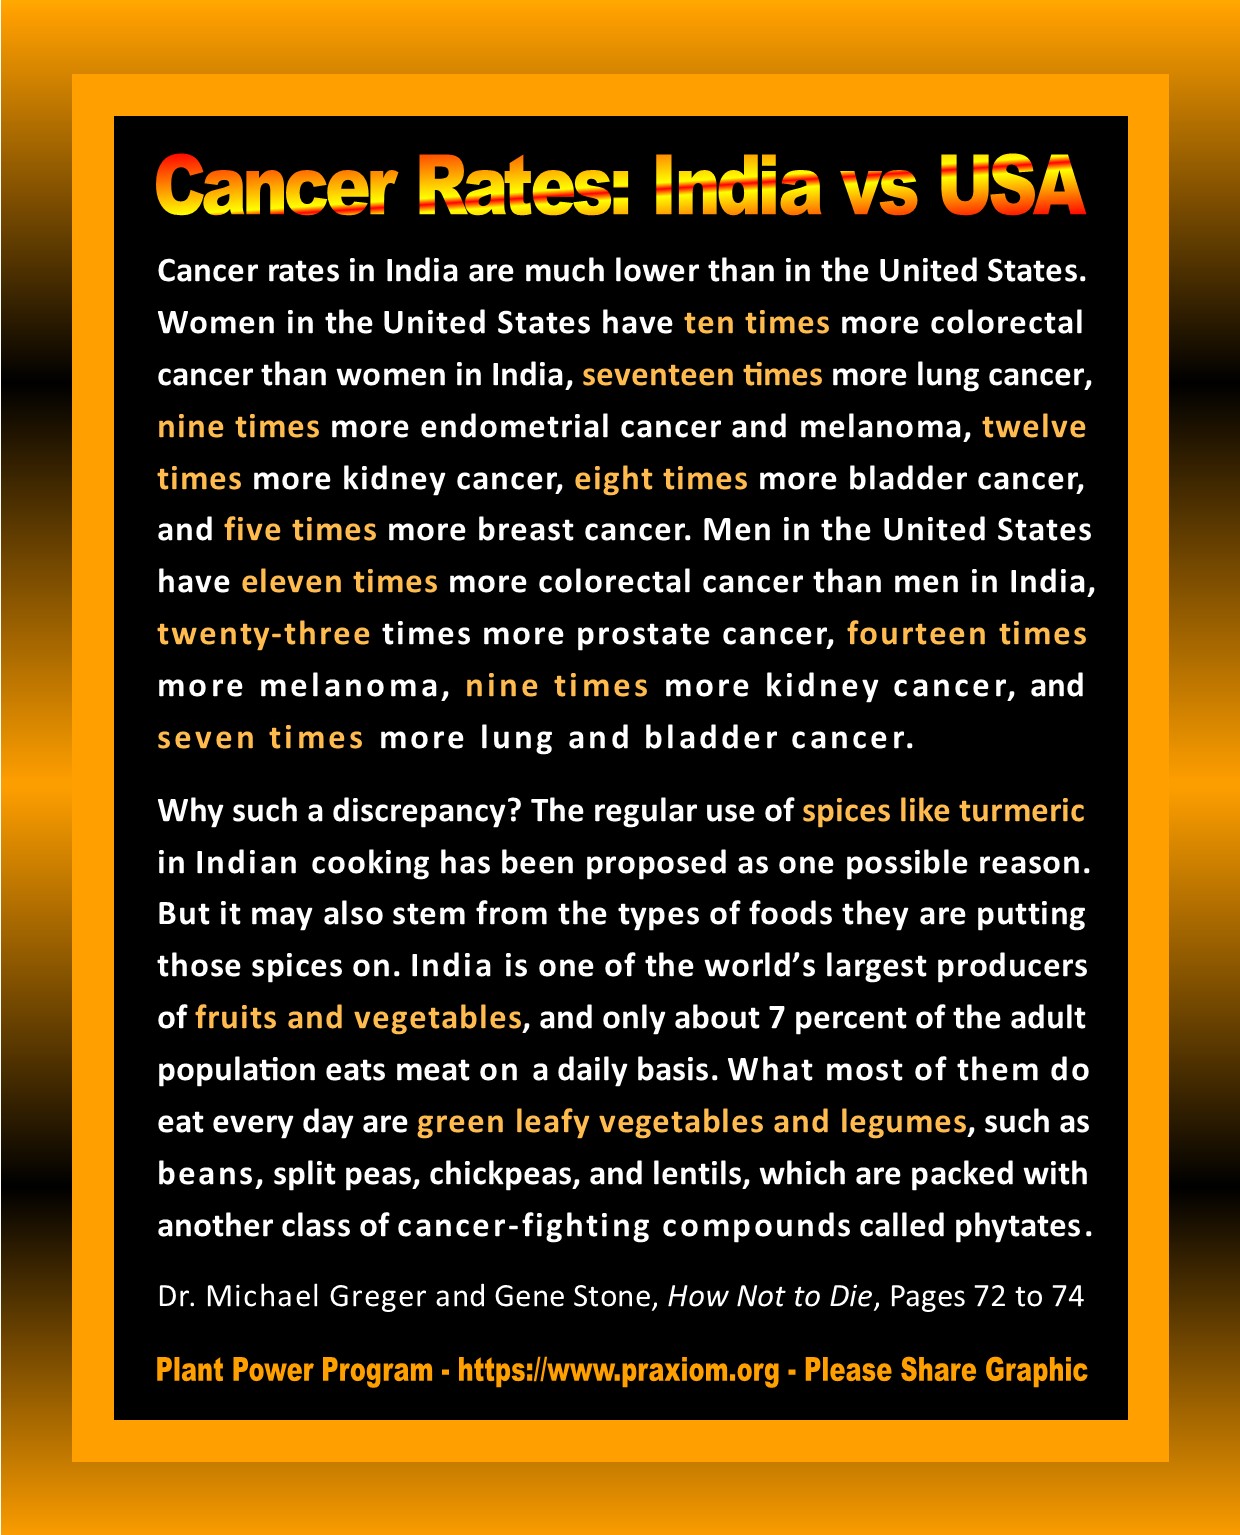 Cancer Rates China vs USA - Dr Michael Greger